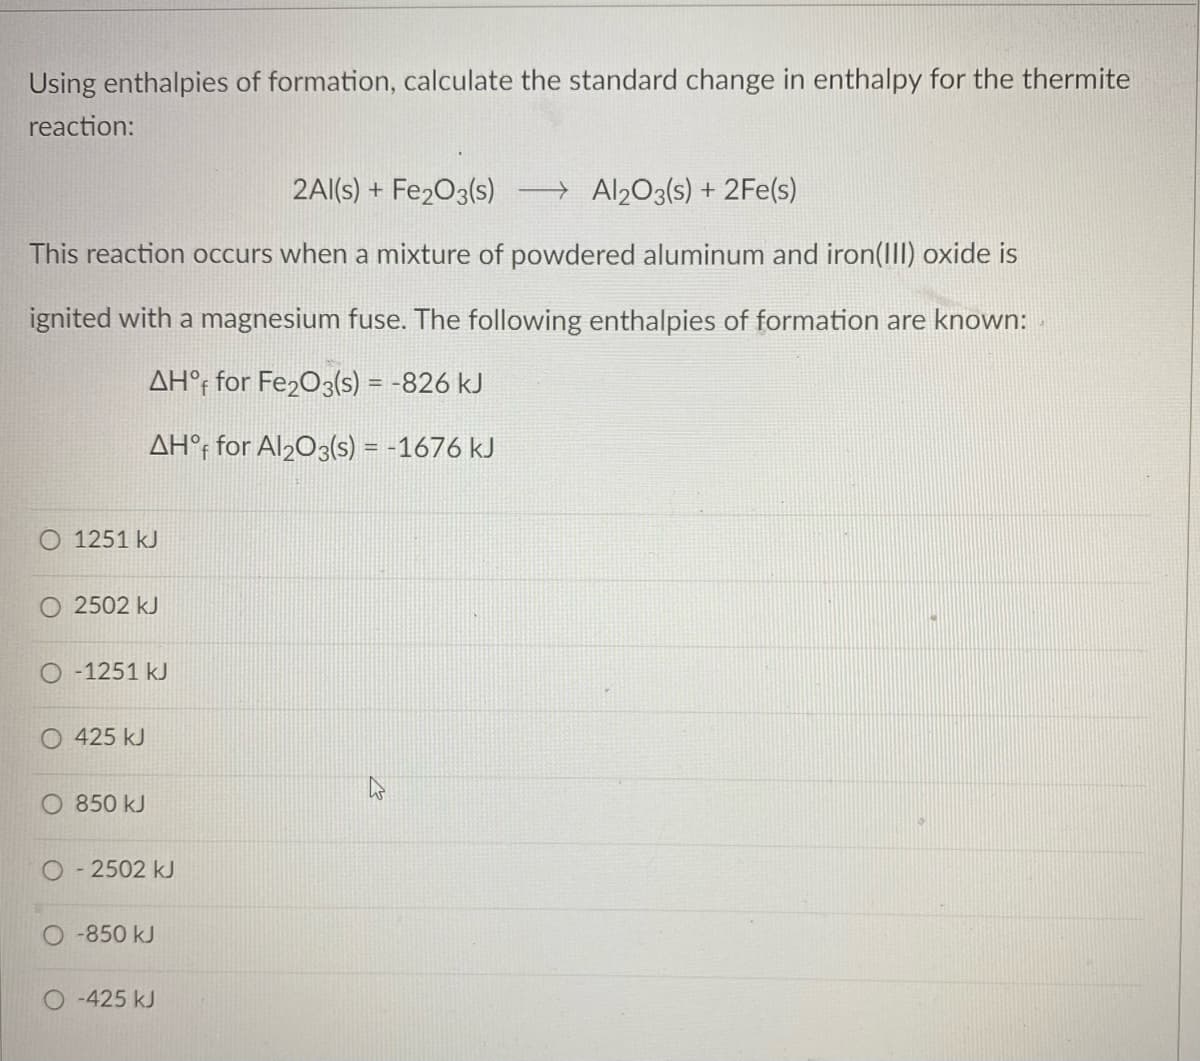 Using enthalpies of formation, calculate the standard change in enthalpy for the thermite
reaction:
2Al(s) + Fe203(s)
→ Al203(s) + 2Fe(s)
This reaction occurs when a mixture of powdered aluminum and iron(III) oxide is
ignited with a magnesium fuse. The following enthalpies of formation are known:
AH°; for Fe203(s) = -826 kJ
AH°; for Al203(s) = -1676 kJ
O 1251 kJ
O 2502 kJ
O-1251 kJ
O 425 kJ
850 kJ
O- 2502 kJ
-850 kJ
-425 kJ
